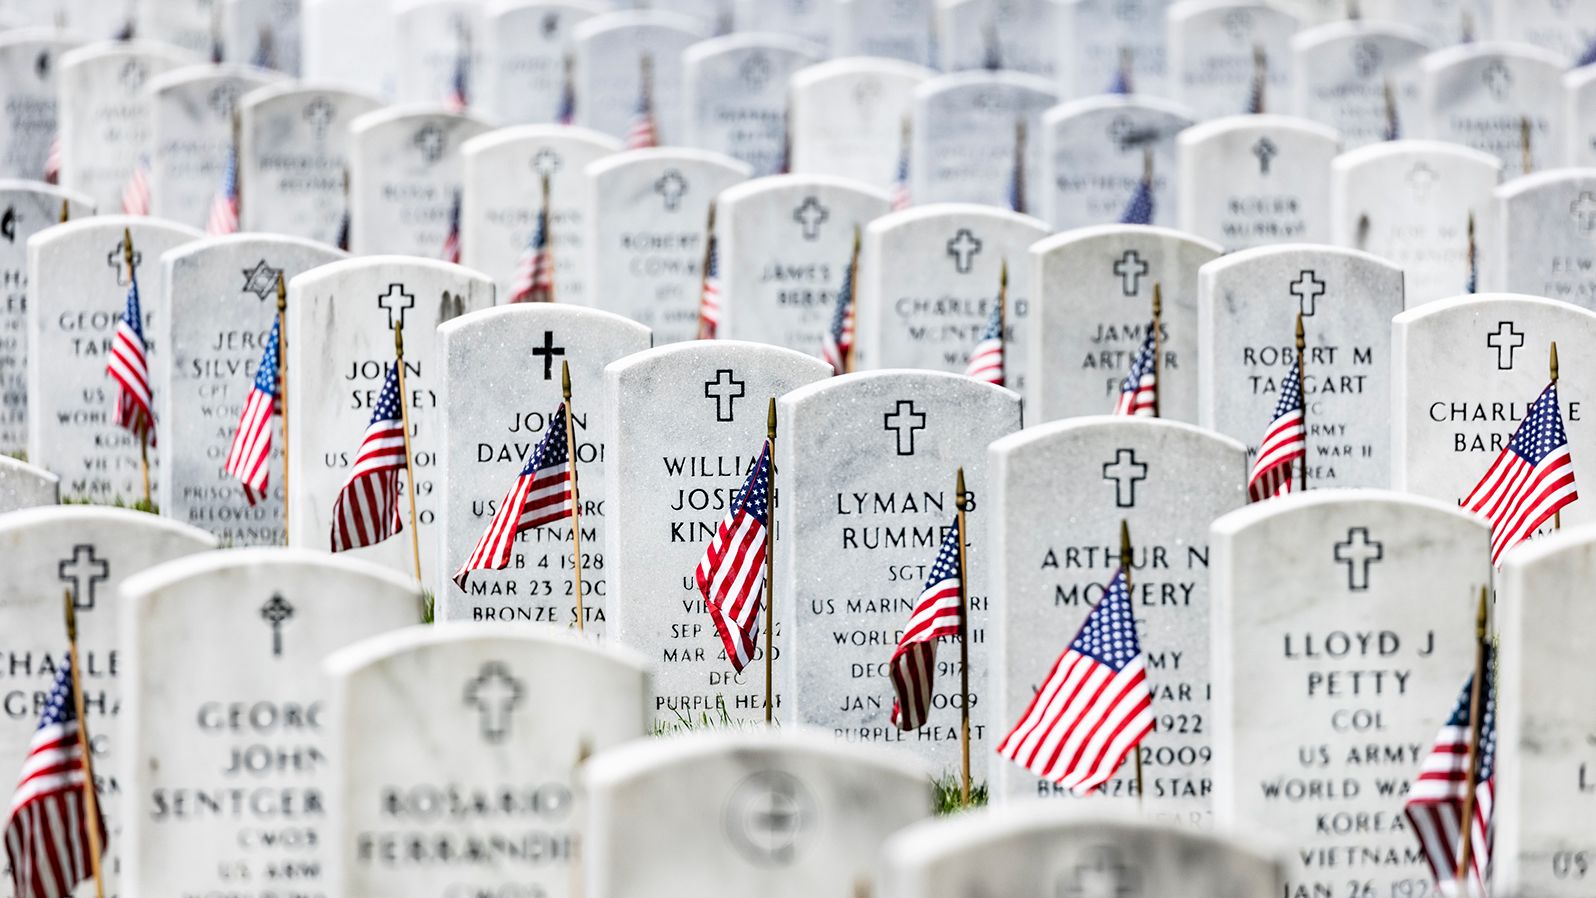 American flags are placed next to the headstones in Arlington National Cemetery.